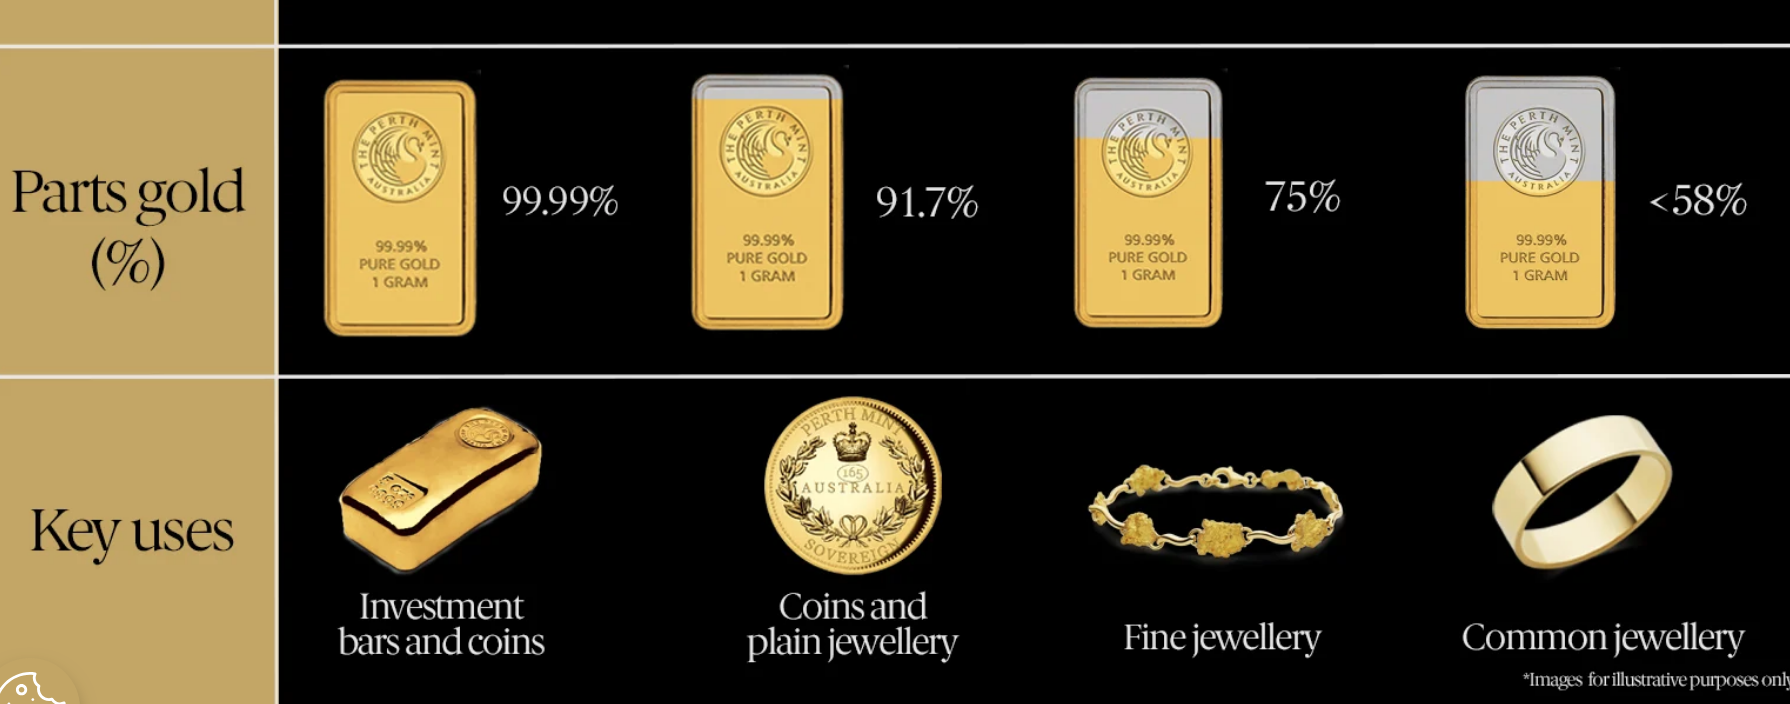 How To Evaluate The Purity Of Gold Before Investing In Malaysia?